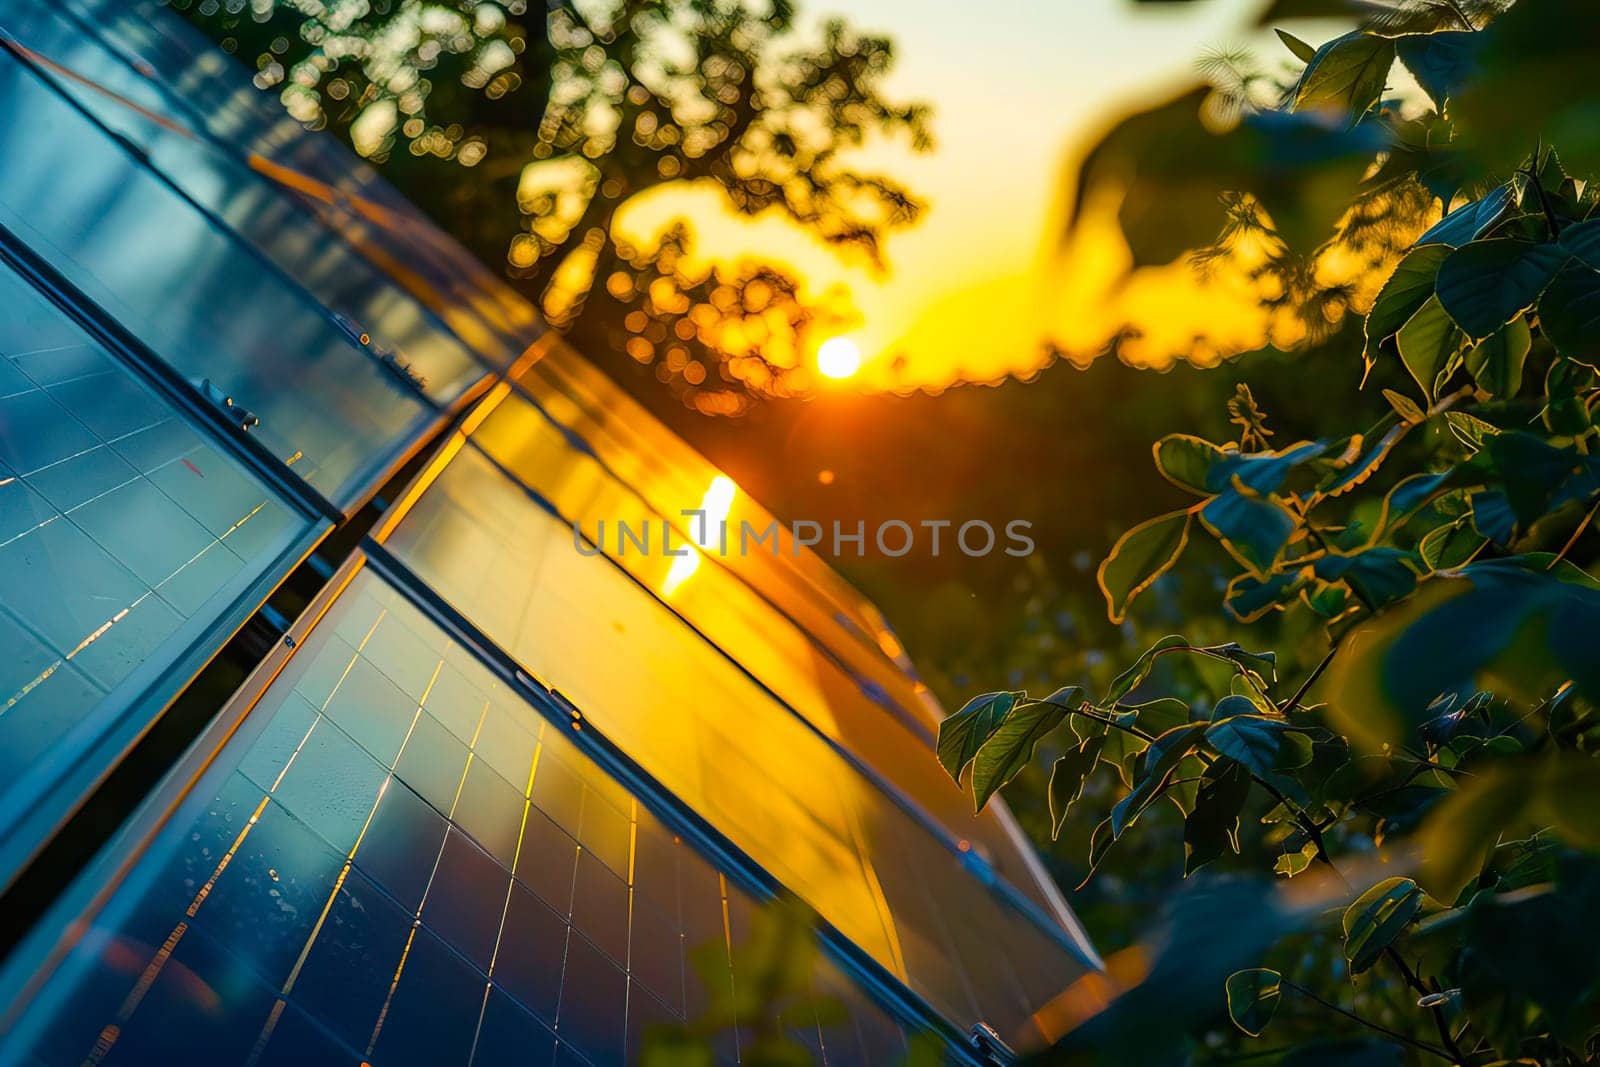 A detailed view of a solar panel with the sun setting in the background against a backdrop of green trees.